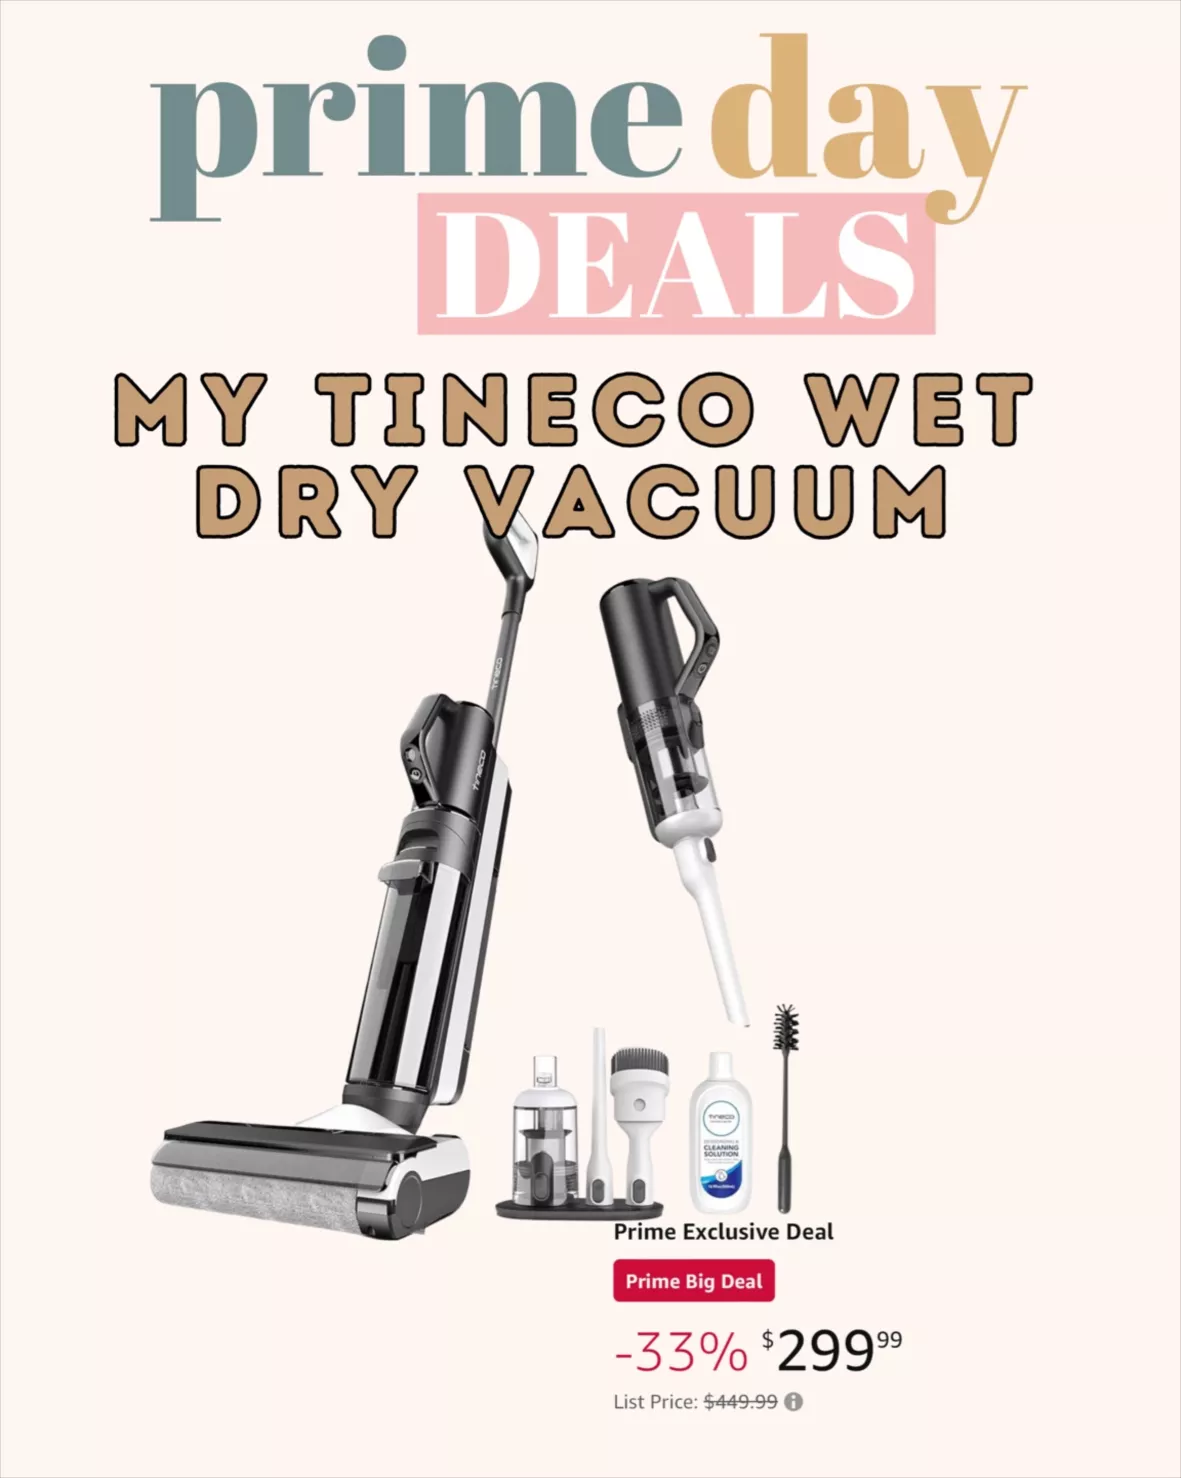 Tineco Smart Wet Dry Vacuum Cleaners, Floor Cleaner Mop 2-in-1 Cordless  Vacuum for Multi-Surface, Lightweight and Handheld, Floor ONE S5 Combo